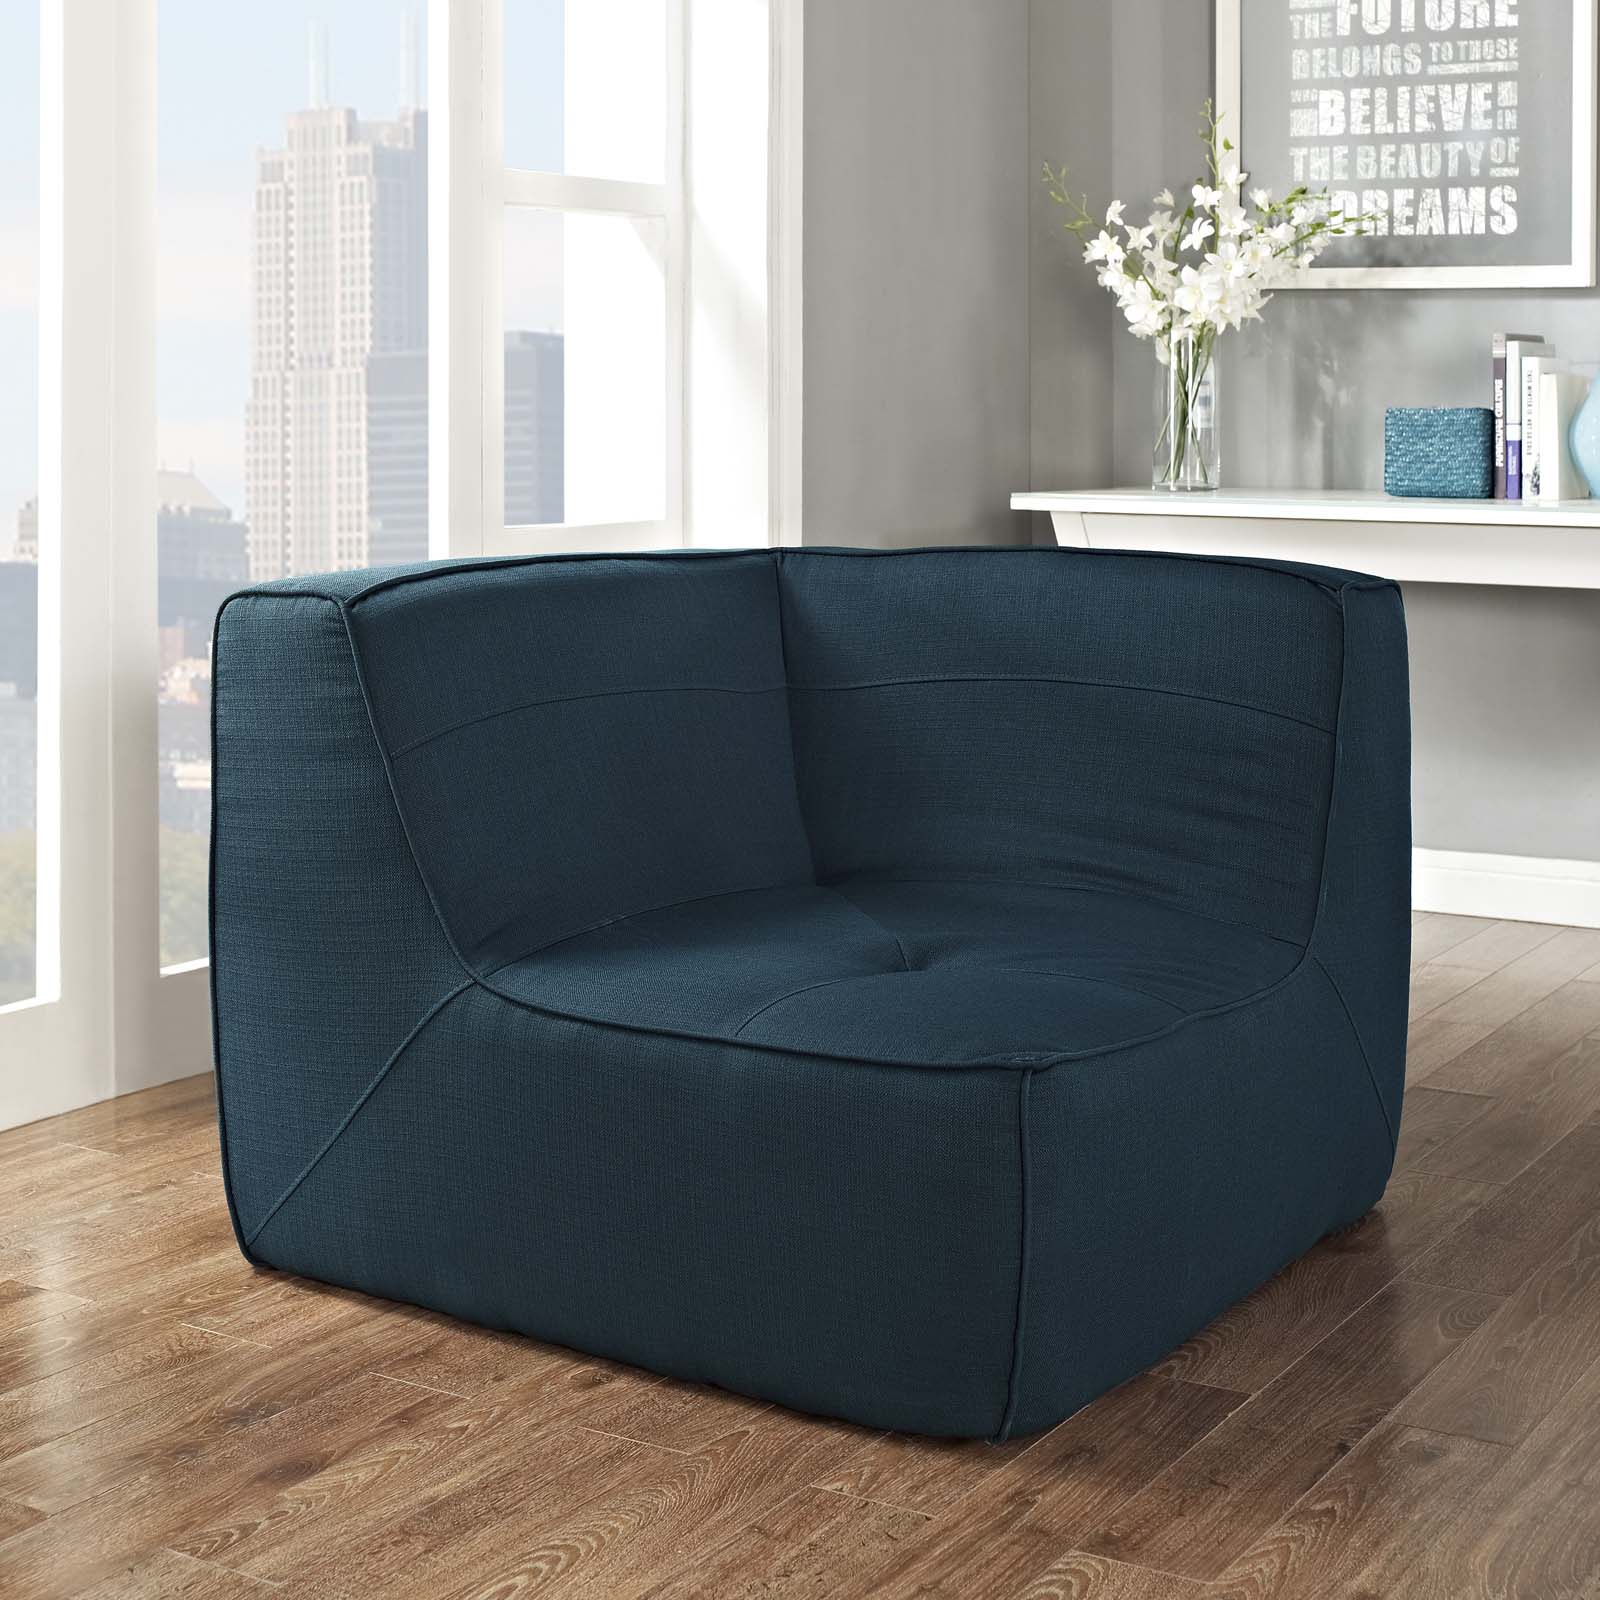 Modway Accent Chairs - Align Upholstered Fabric Corner Sofa Azure